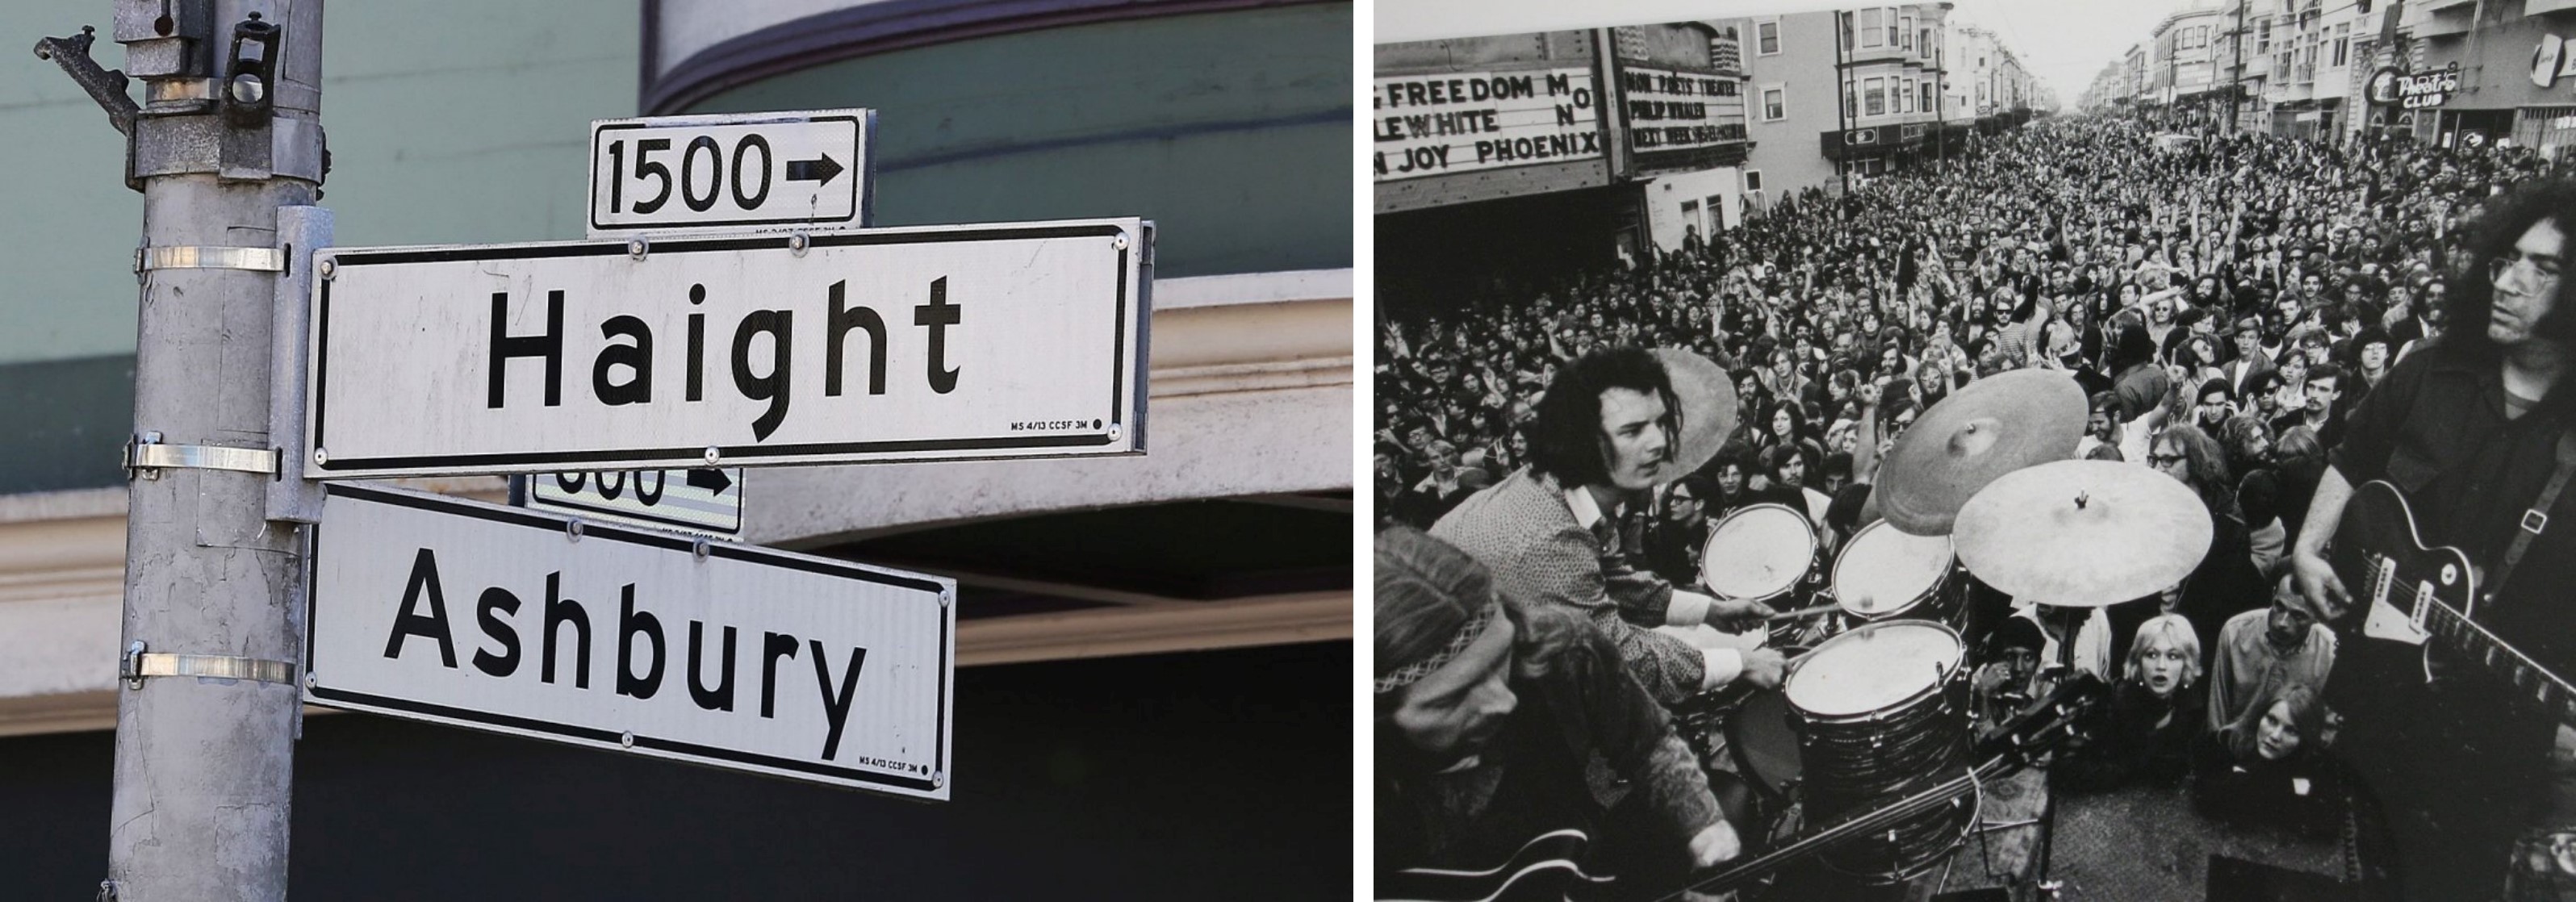 On the left, the junction of Haight and Ashbury. On the right, the Grateful Dead performing at Haight.